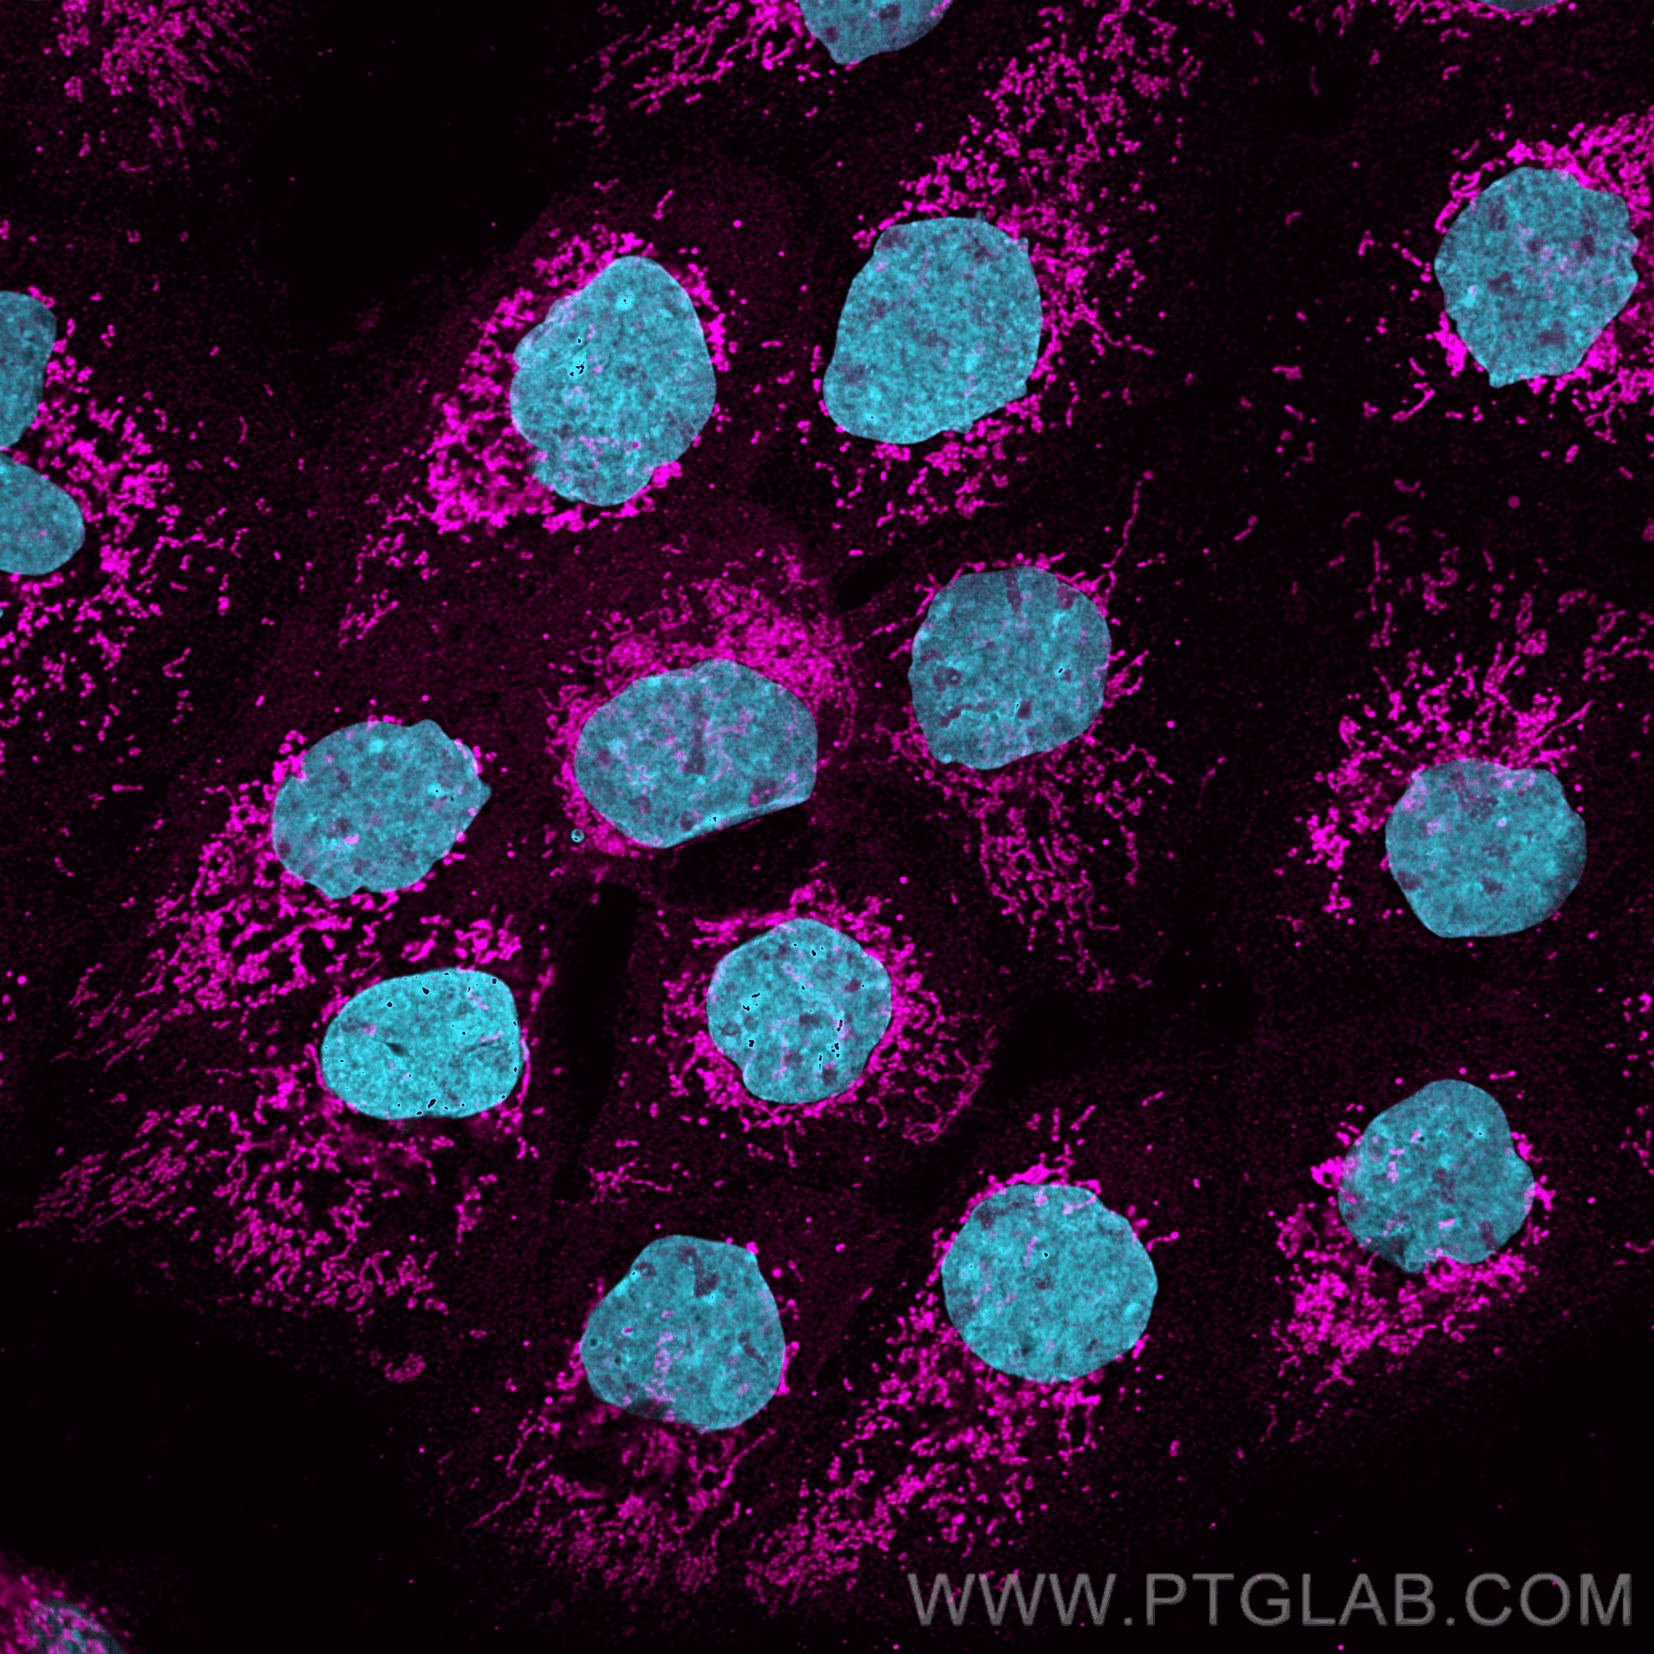 Immunofluorescence analysis of A431 cells stained with rabbit anti-COXIV antibody (11242-1-AP, magenta) and Nano-Secondary® alpaca anti-rabbit IgG, recombinant VHH, CoraLite® Plus 647 (srb2GCL647-1), 1:500. Nuclei were stained with DAPI (blue). Images were recorded at the Core Facility Bioimaging at the Biomedical Center, LMU Munich.